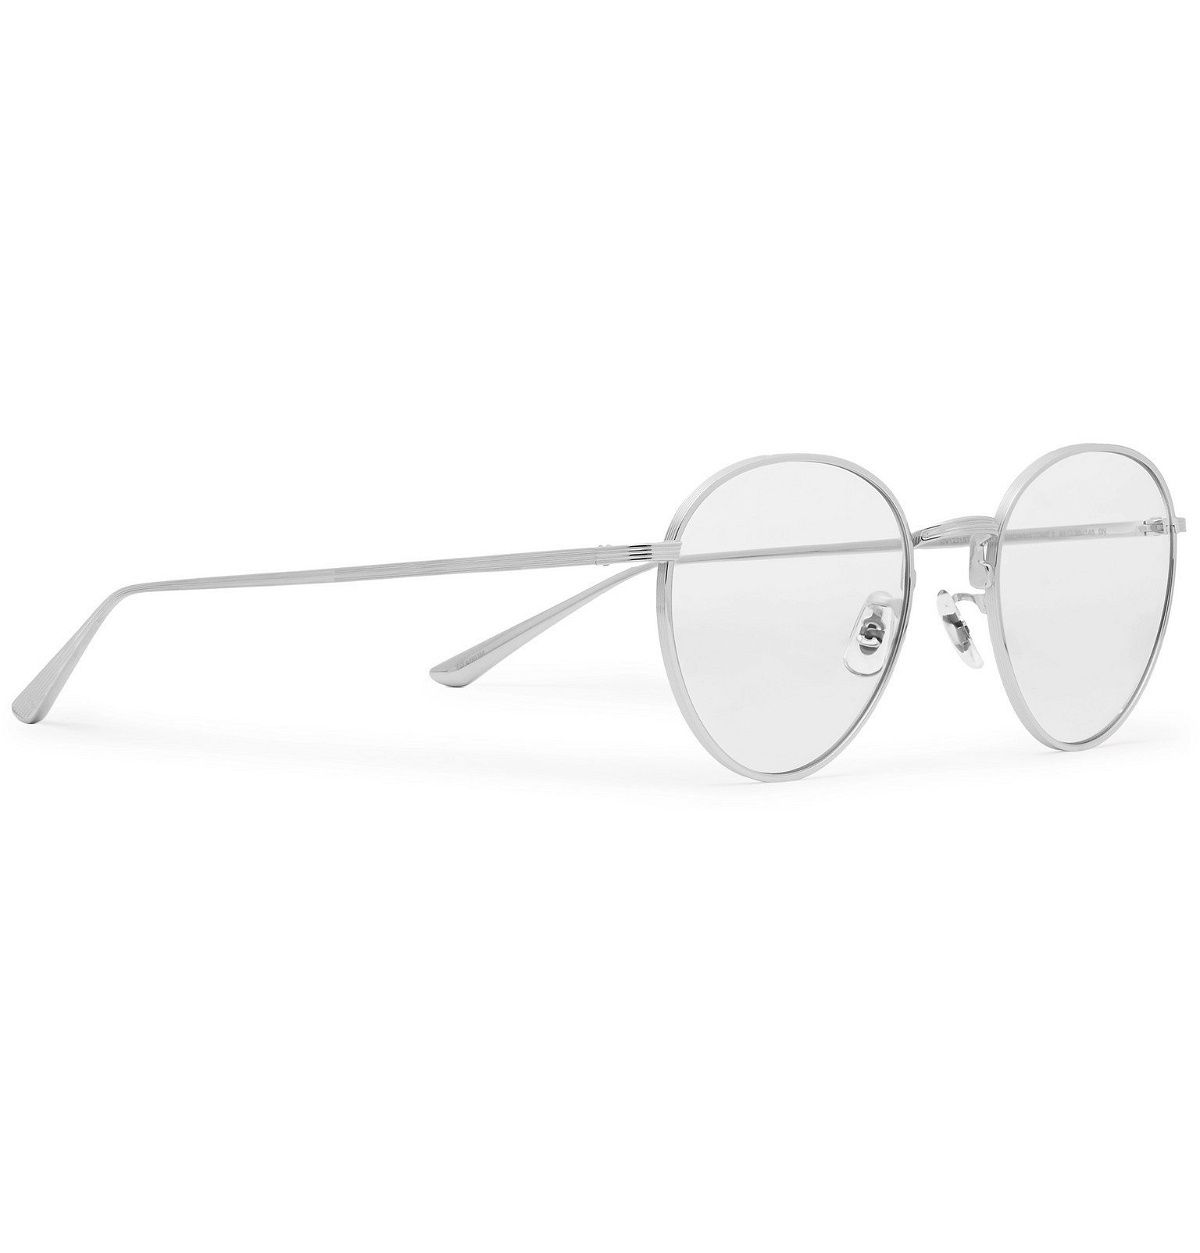 The Row - Oliver Peoples Brownstone 2 Round-Frame Titanium Optical